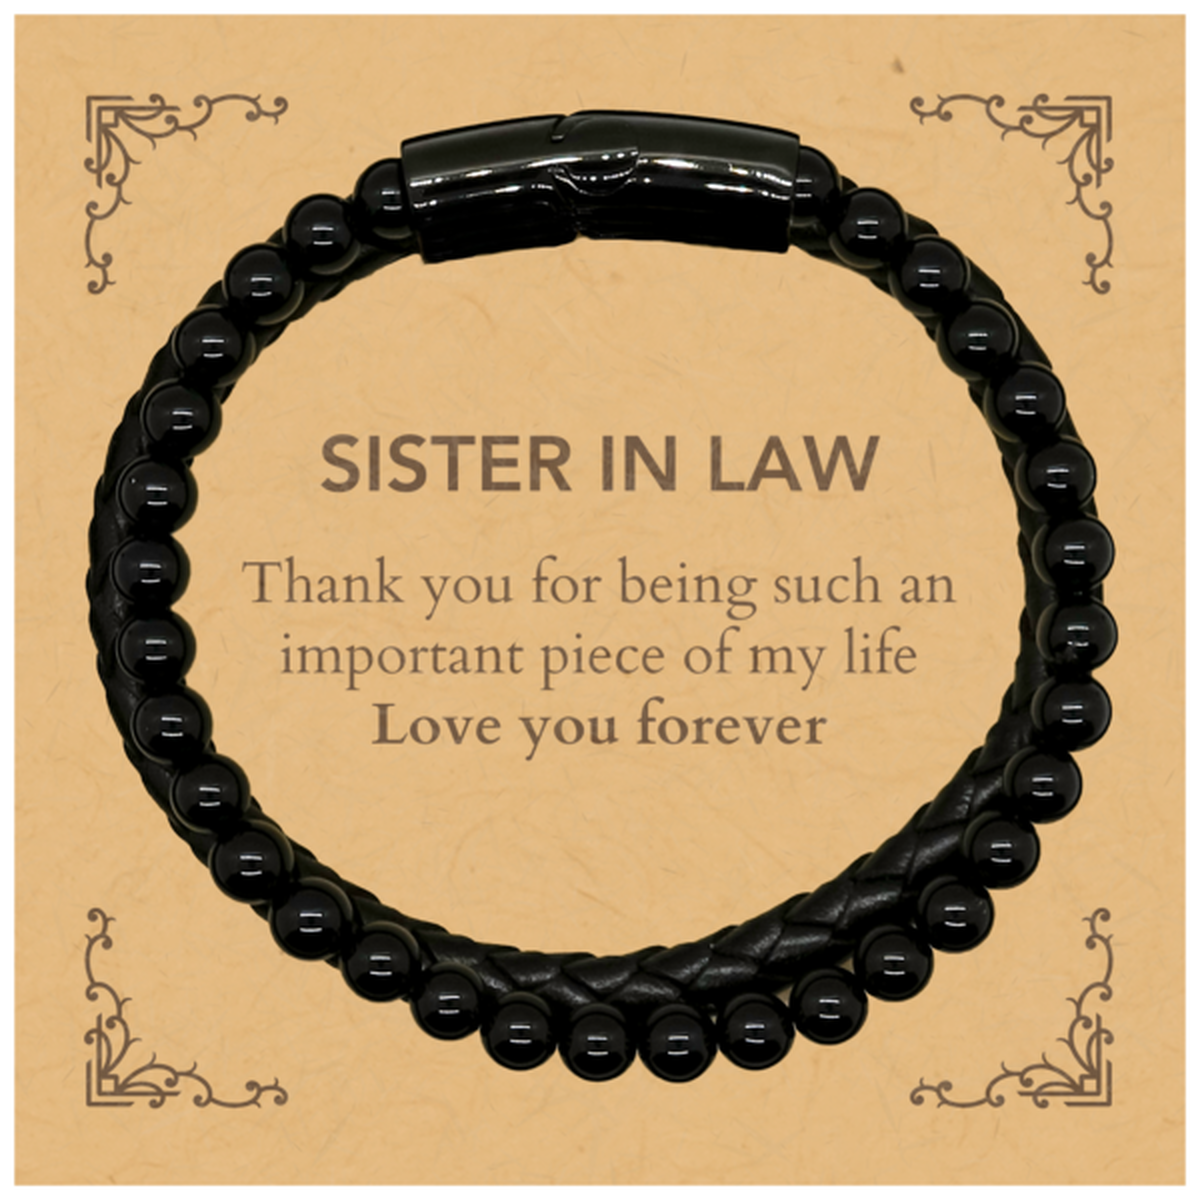 Appropriate Sister In Law Stone Leather Bracelets Epic Birthday Gifts for Sister In Law Thank you for being such an important piece of my life Sister In Law Christmas Mothers Fathers Day